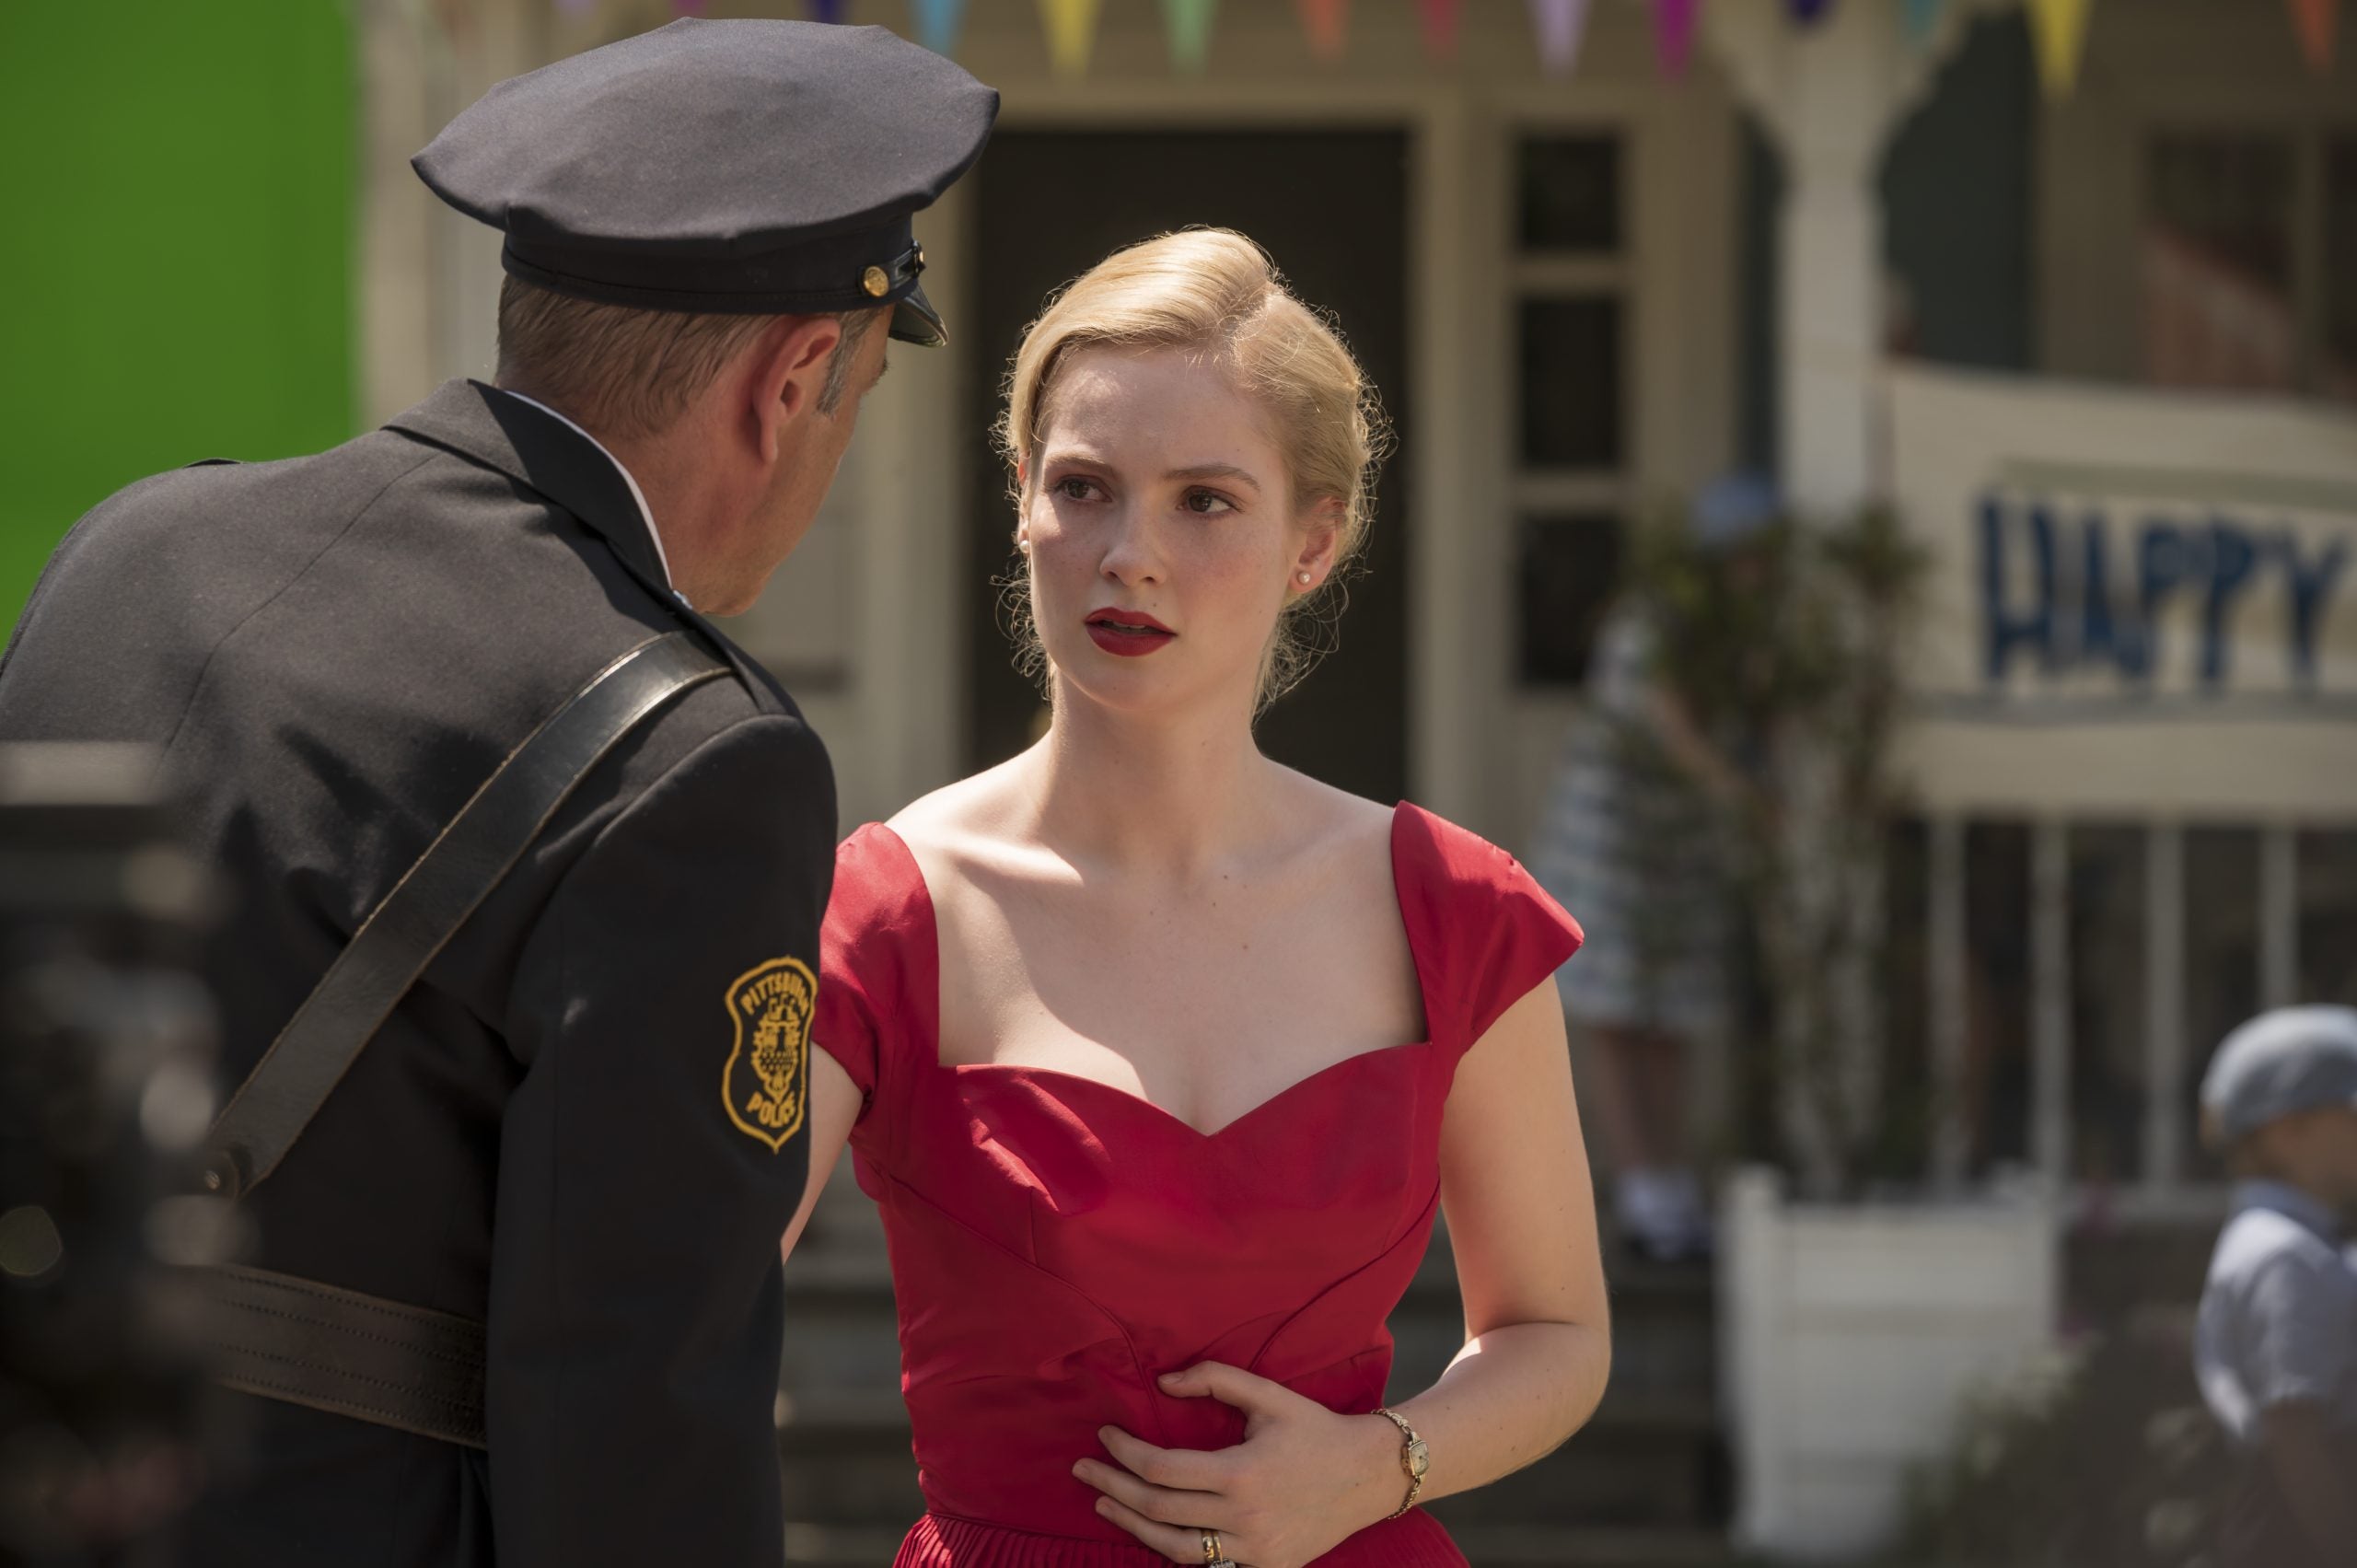 Hannah Dodd as Corrine, wearing a red dress and talking to a police officer, in 'Flowers in the Attic: The Origin'